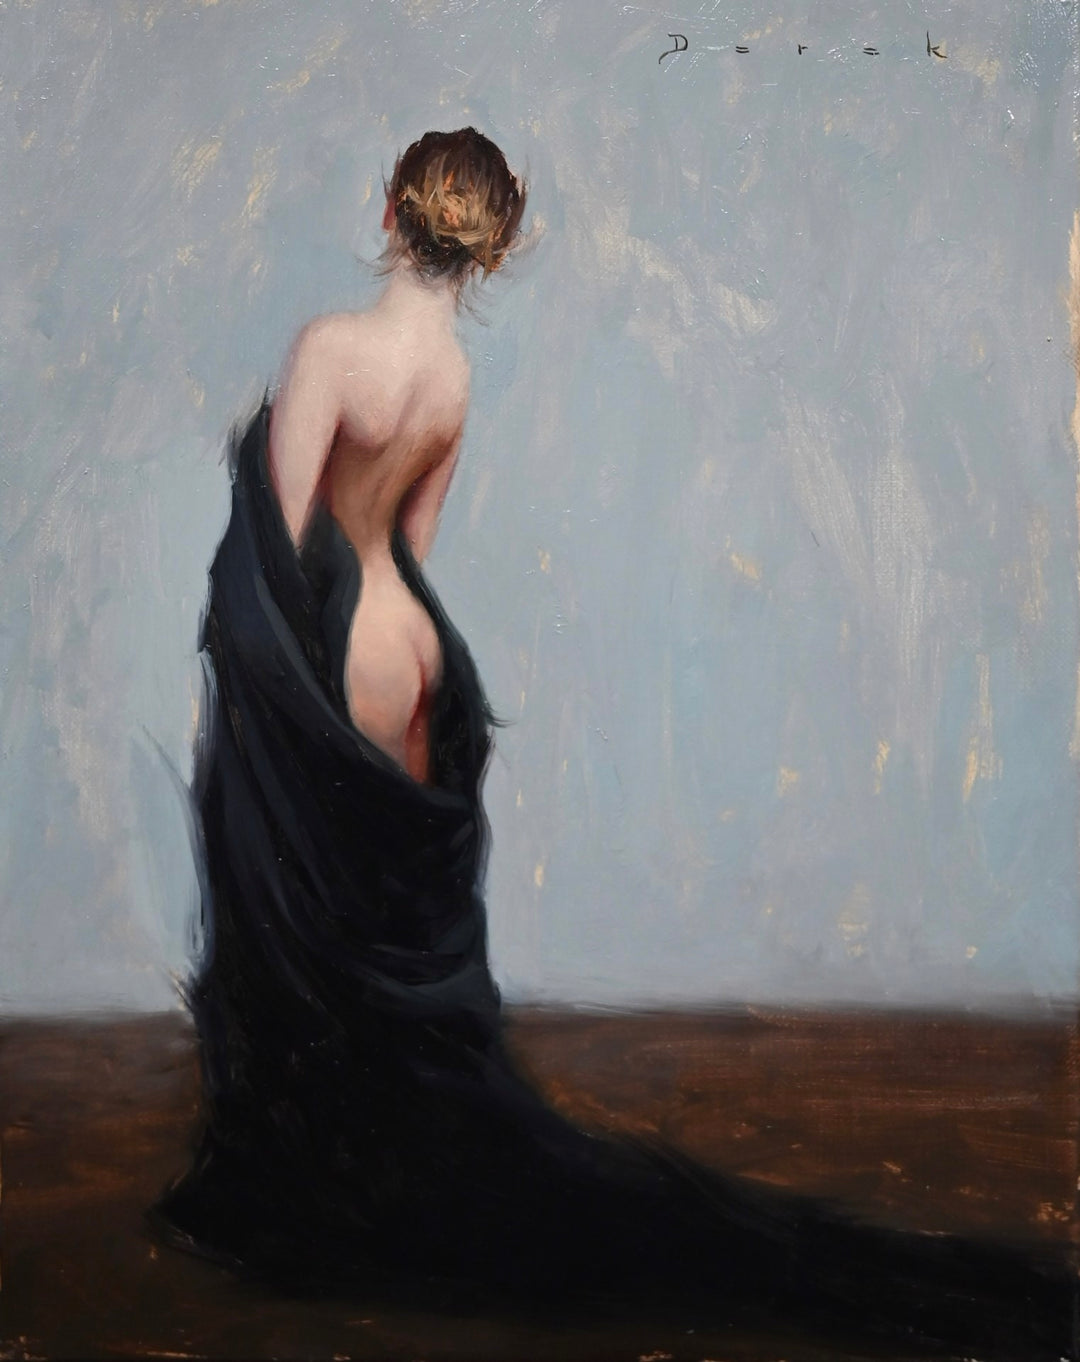 A painting by Derek Harrison of the product "Draped in Black" created with oil.